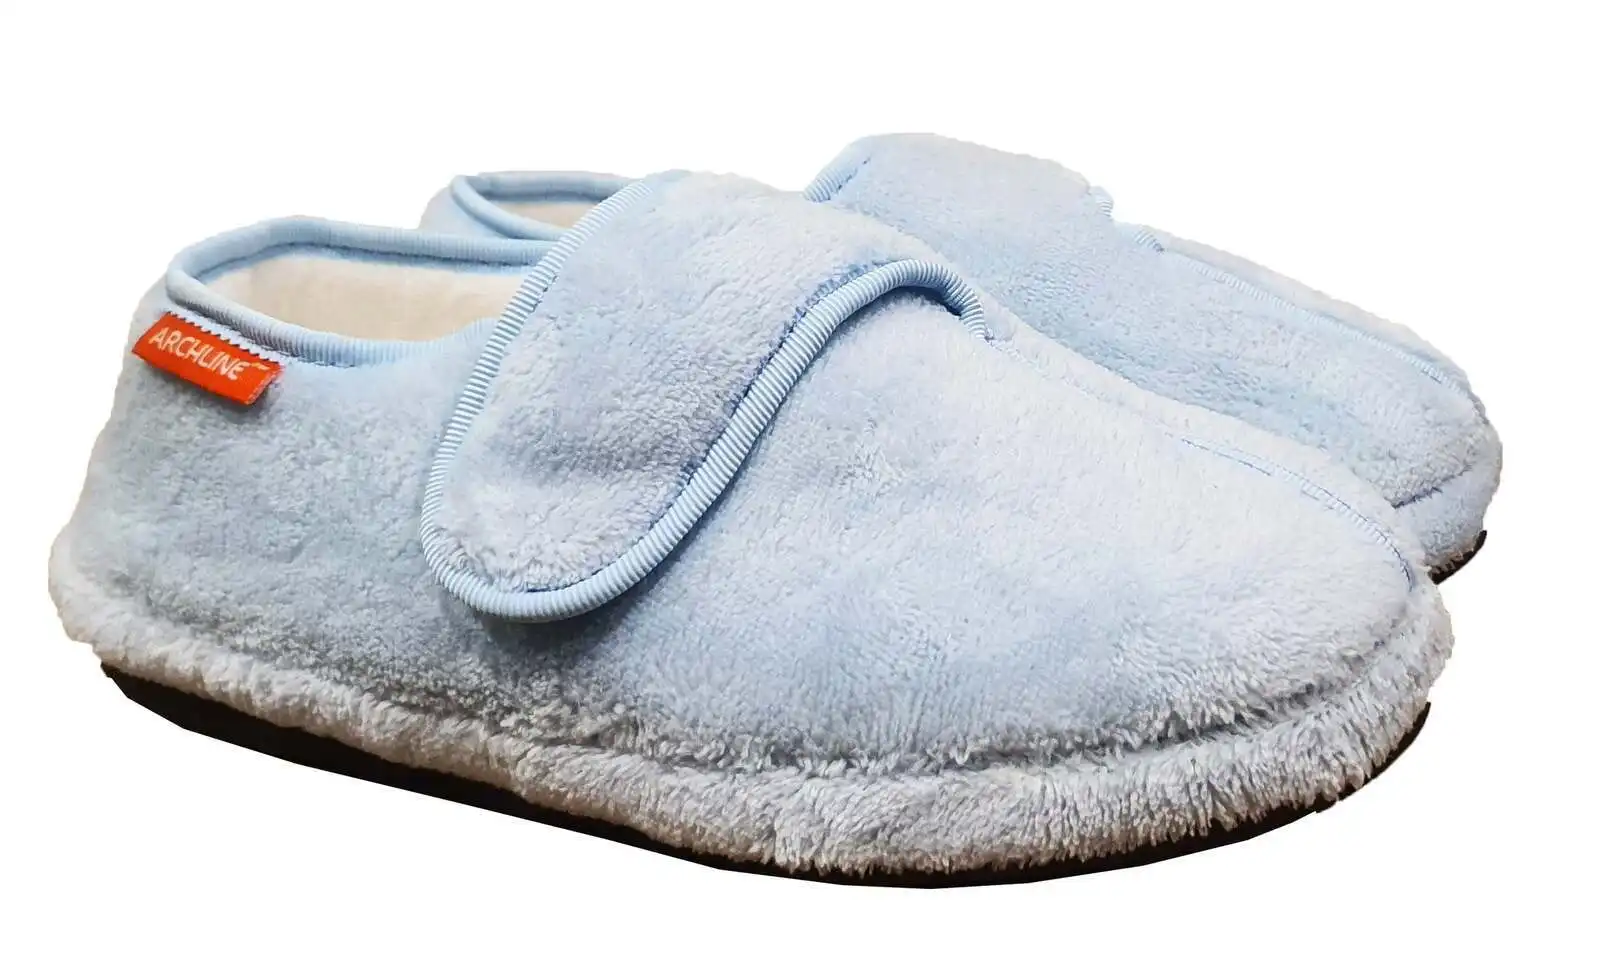 Archline Orthotic Plus Slippers Closed Scuffs Pain Relief Moccasins - Baby Blue